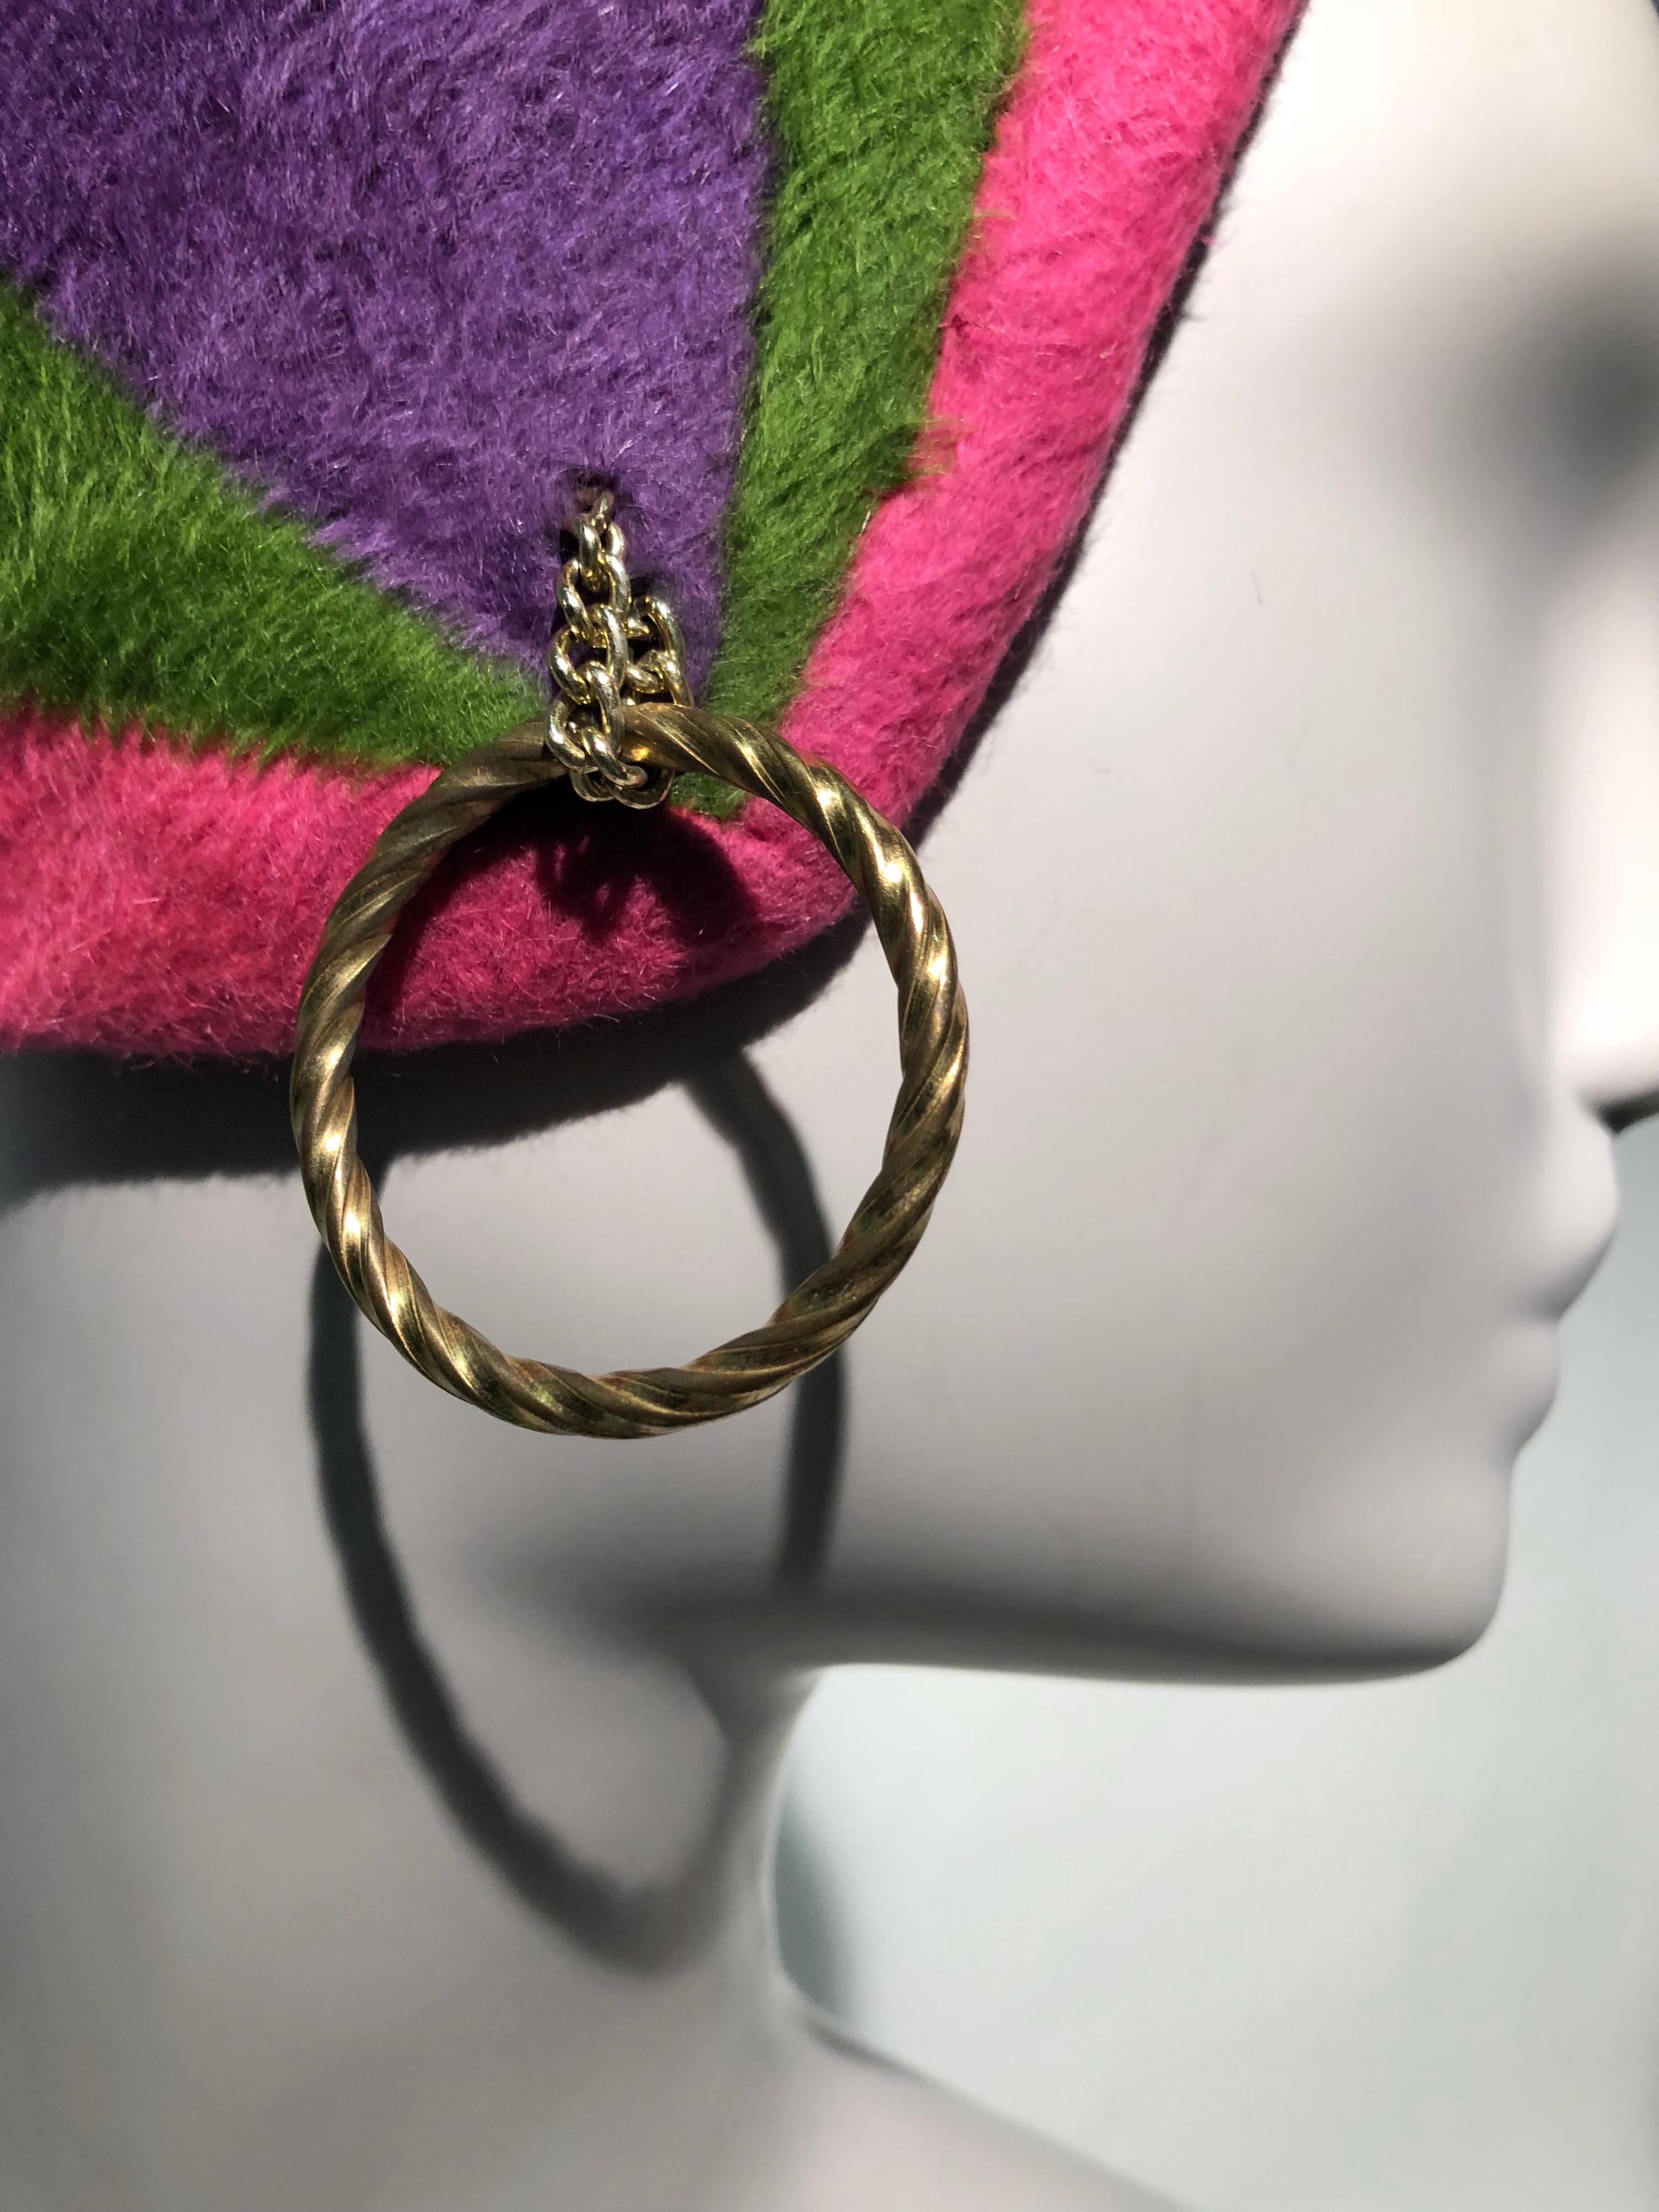 A unique 1960s Adolfo II mod helmet cloche style hat in pink green and purple felt with a gold-tone hoop earring attached on one side, to be worn over the ear. This iconic hat was featured on the cover of Vogue in the 1960s!